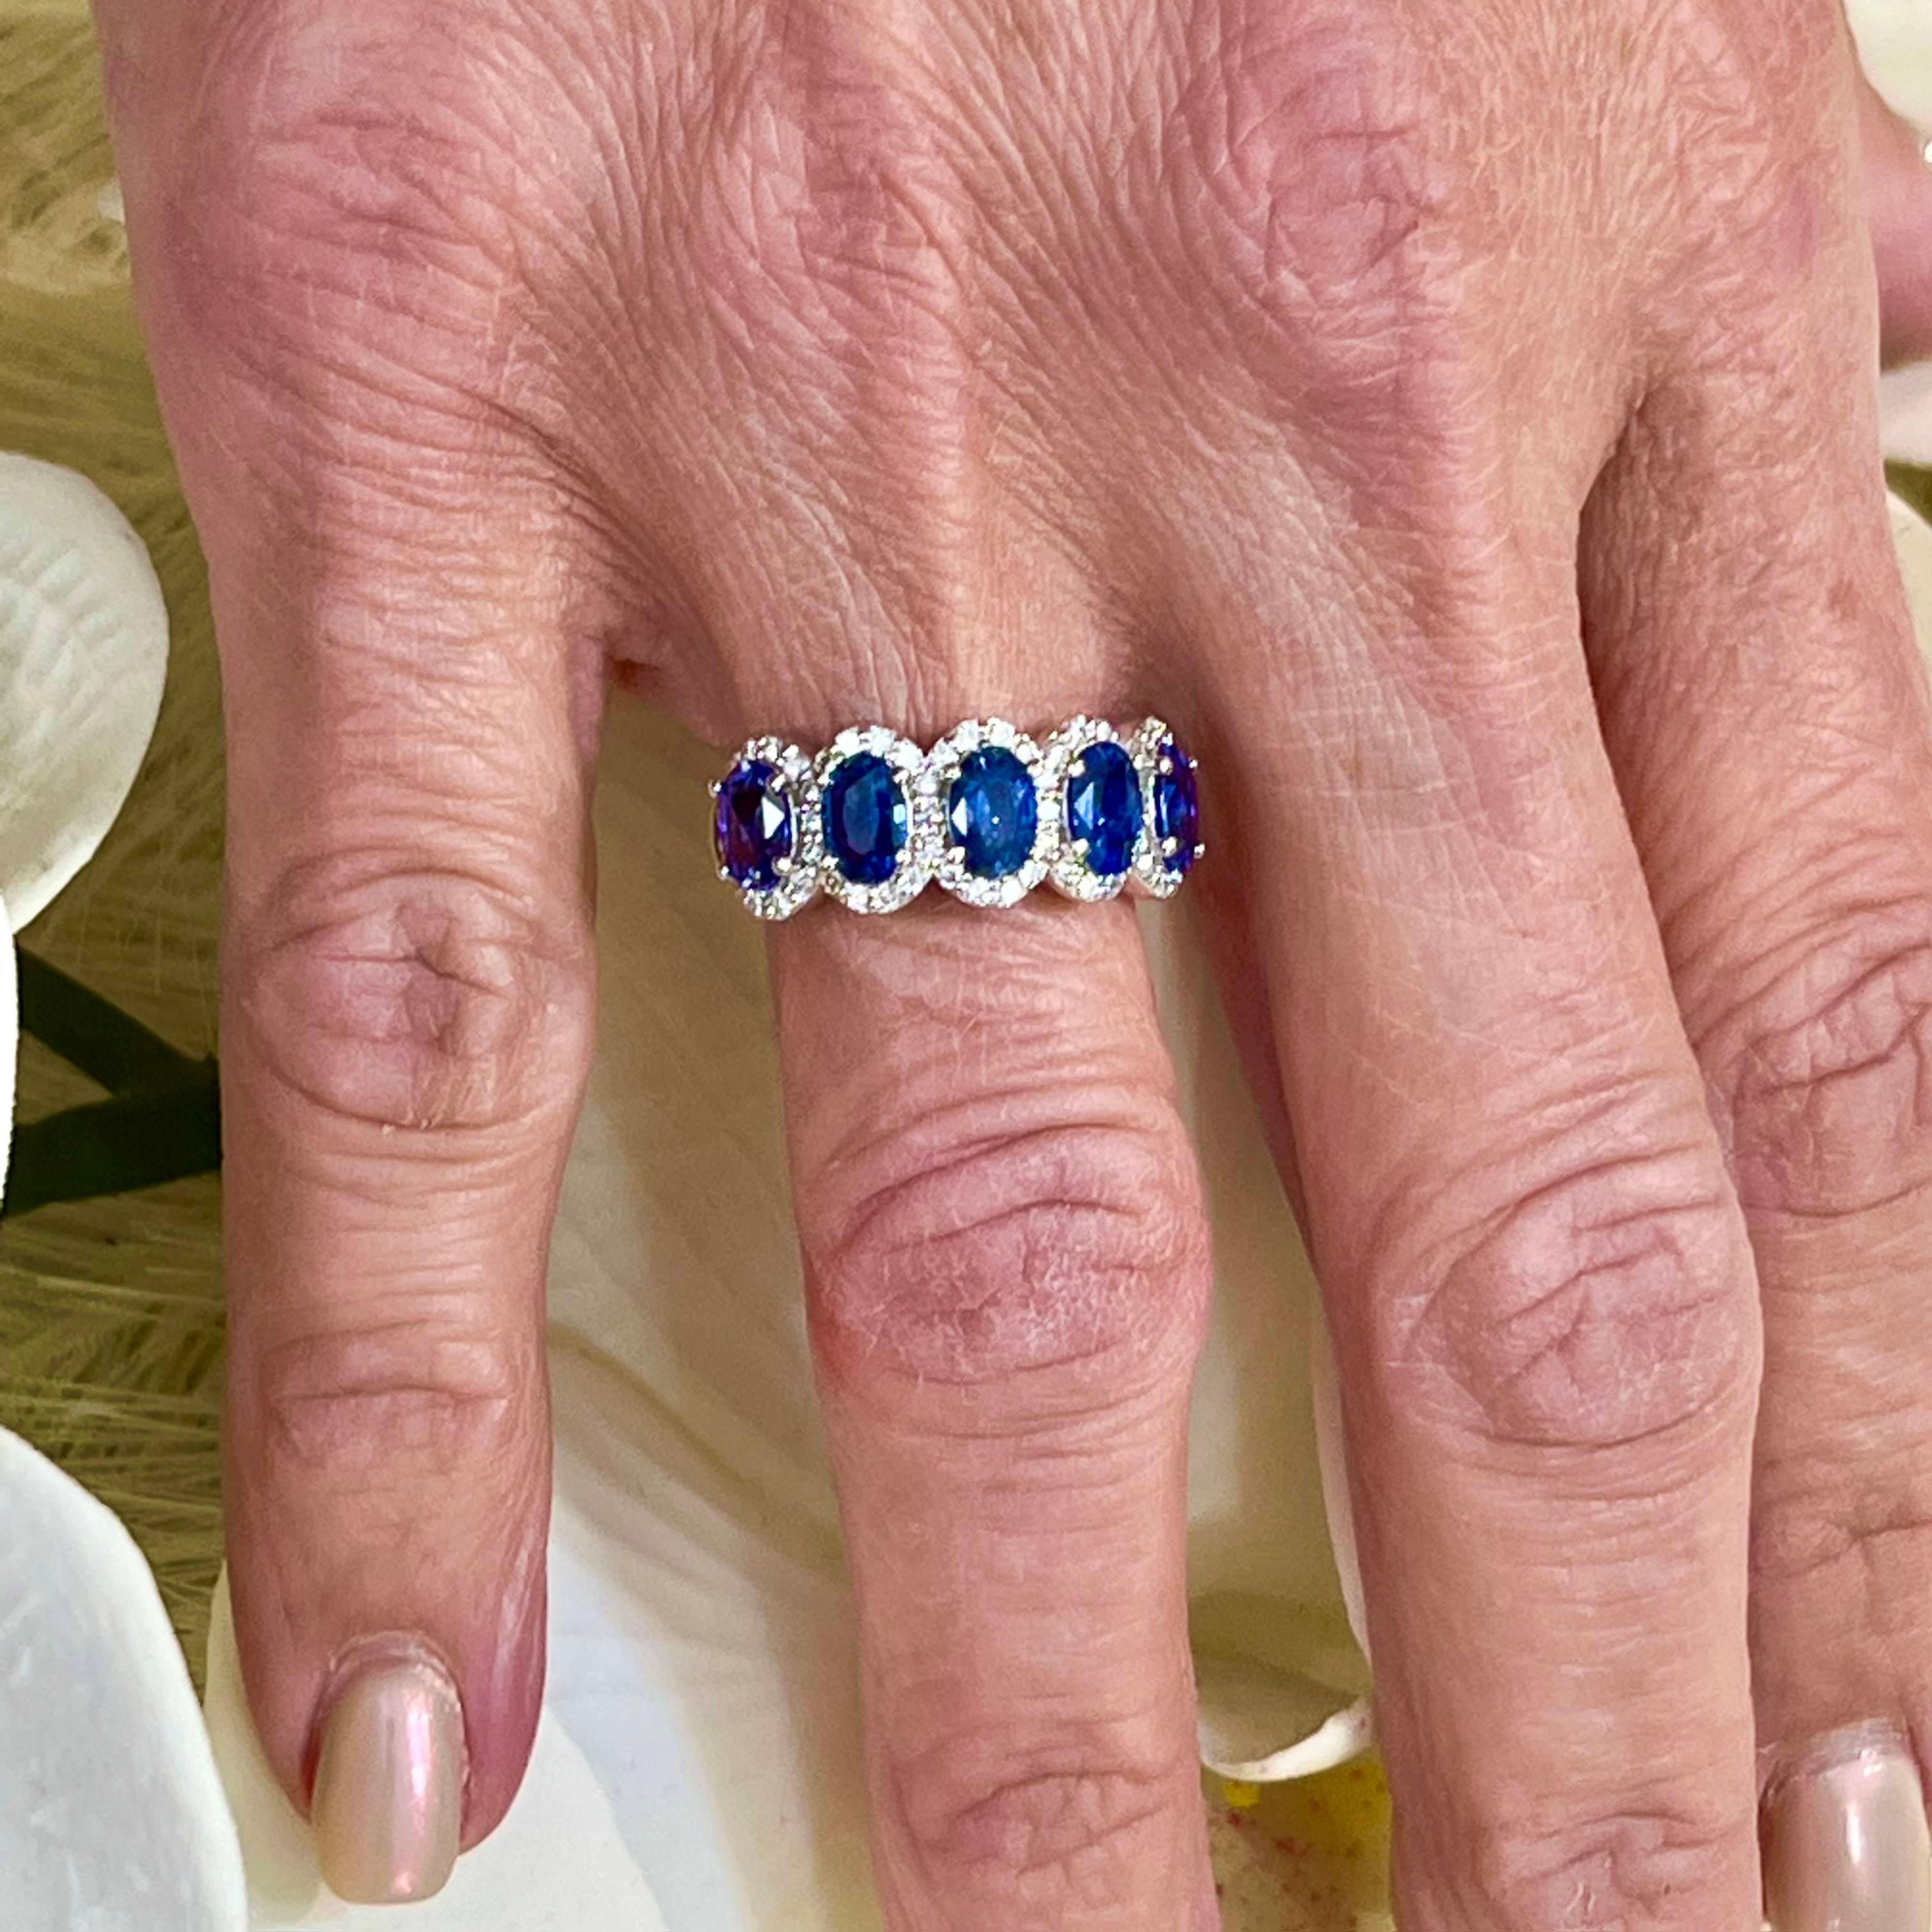 Natural Sapphire Diamond Ring Size 7 14k W Gold 3.07 TCW Certified $5,975 218112

This is a Unique Custom Made Glamorous Piece of Jewelry!

Nothing says, “I Love you” more than Diamonds and Pearls!

This Sapphire ring has been Certified, Inspected,